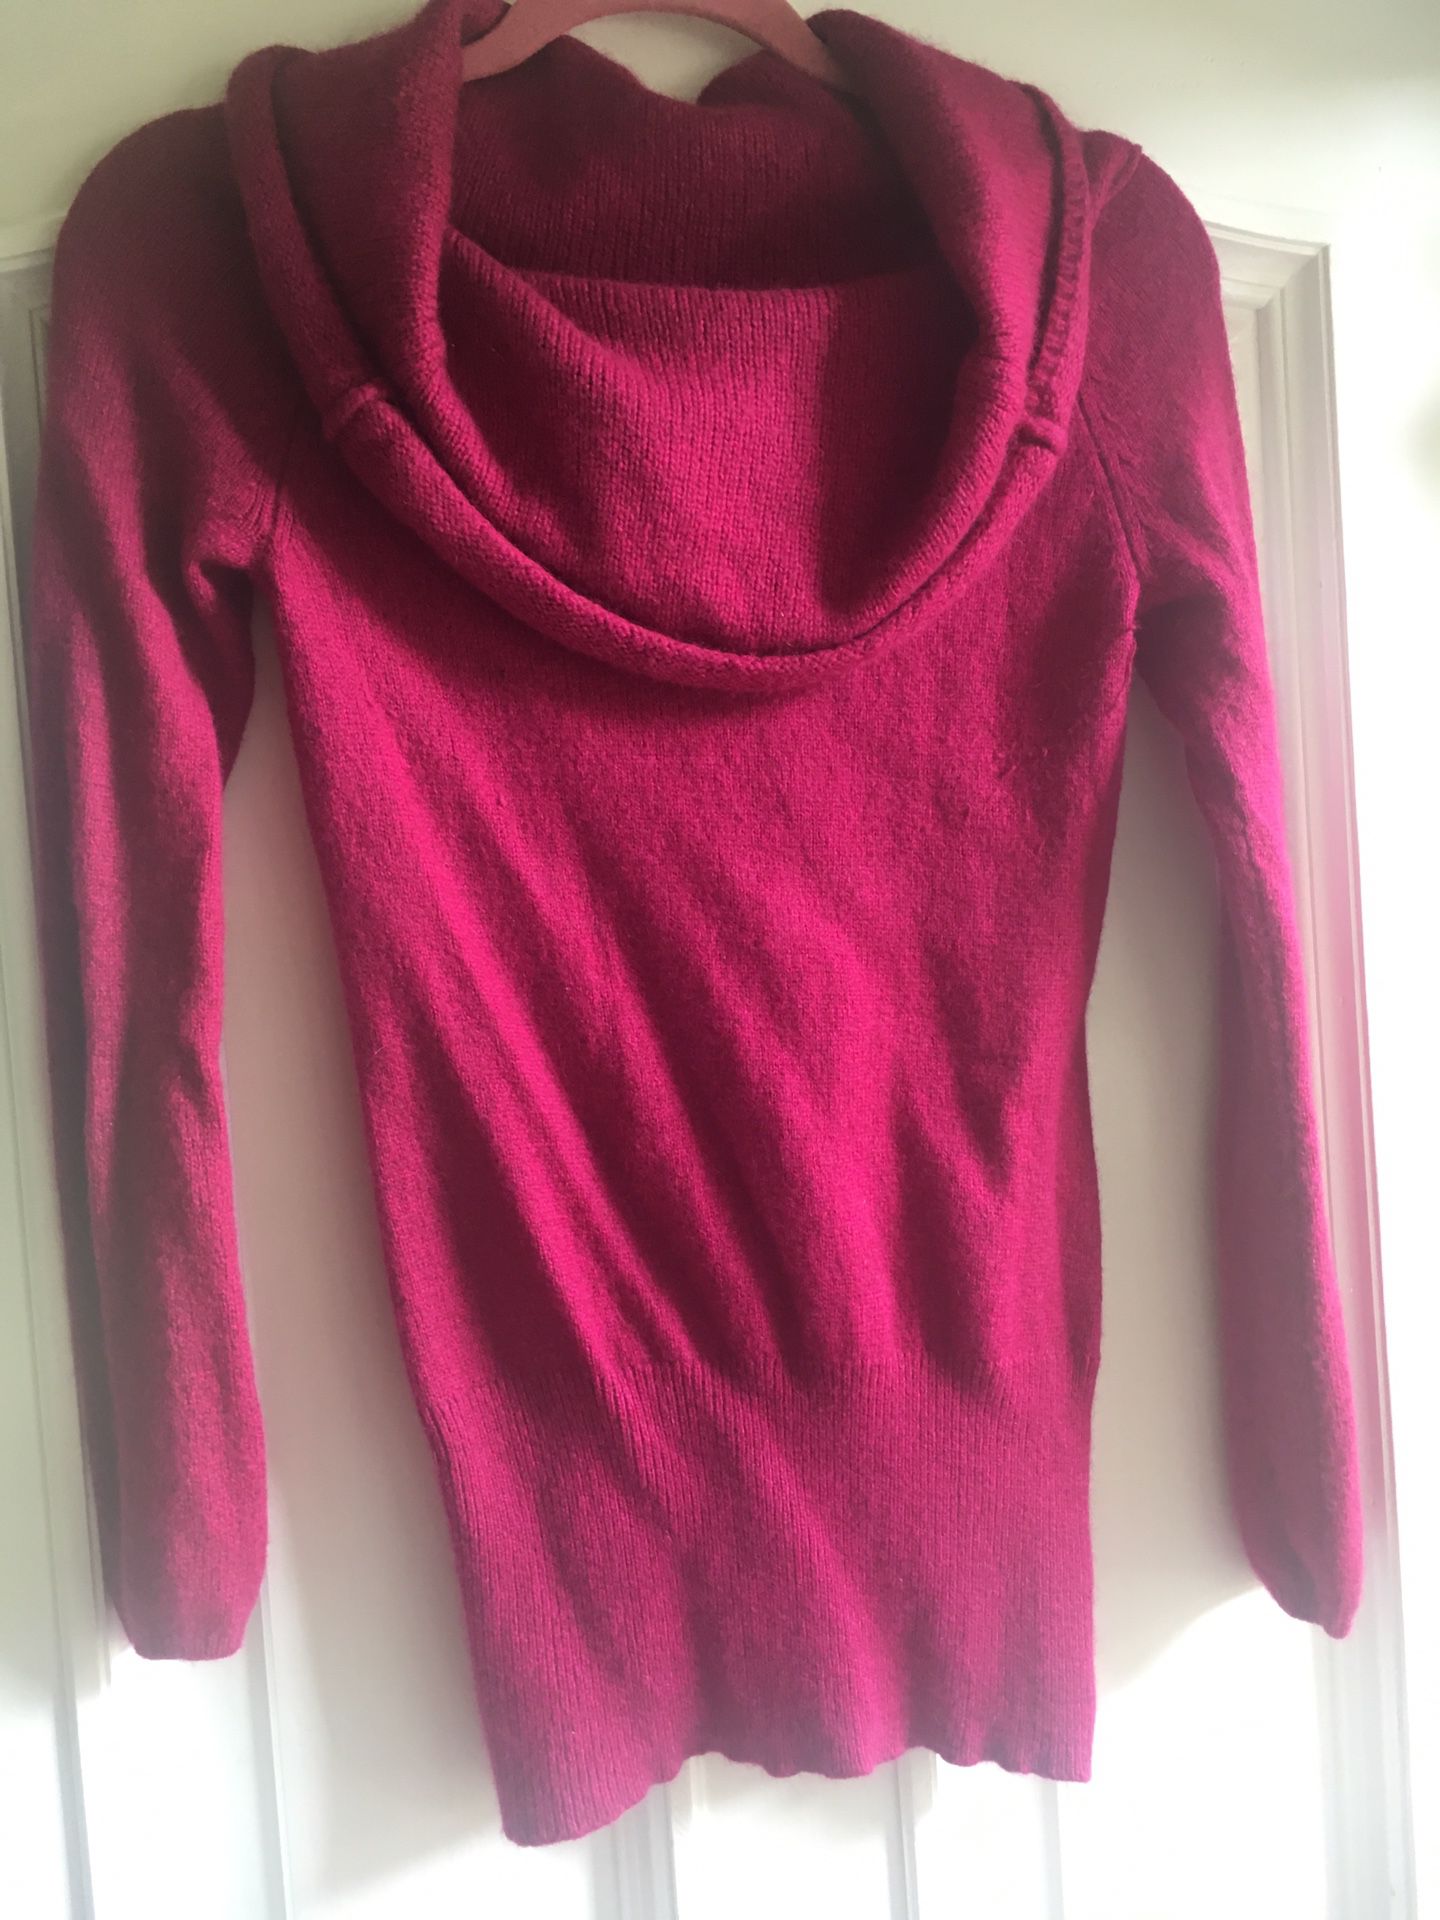 Ladies Wool Rabbit Hair and Cashmere Blend Hot Pink Sweater Size Small